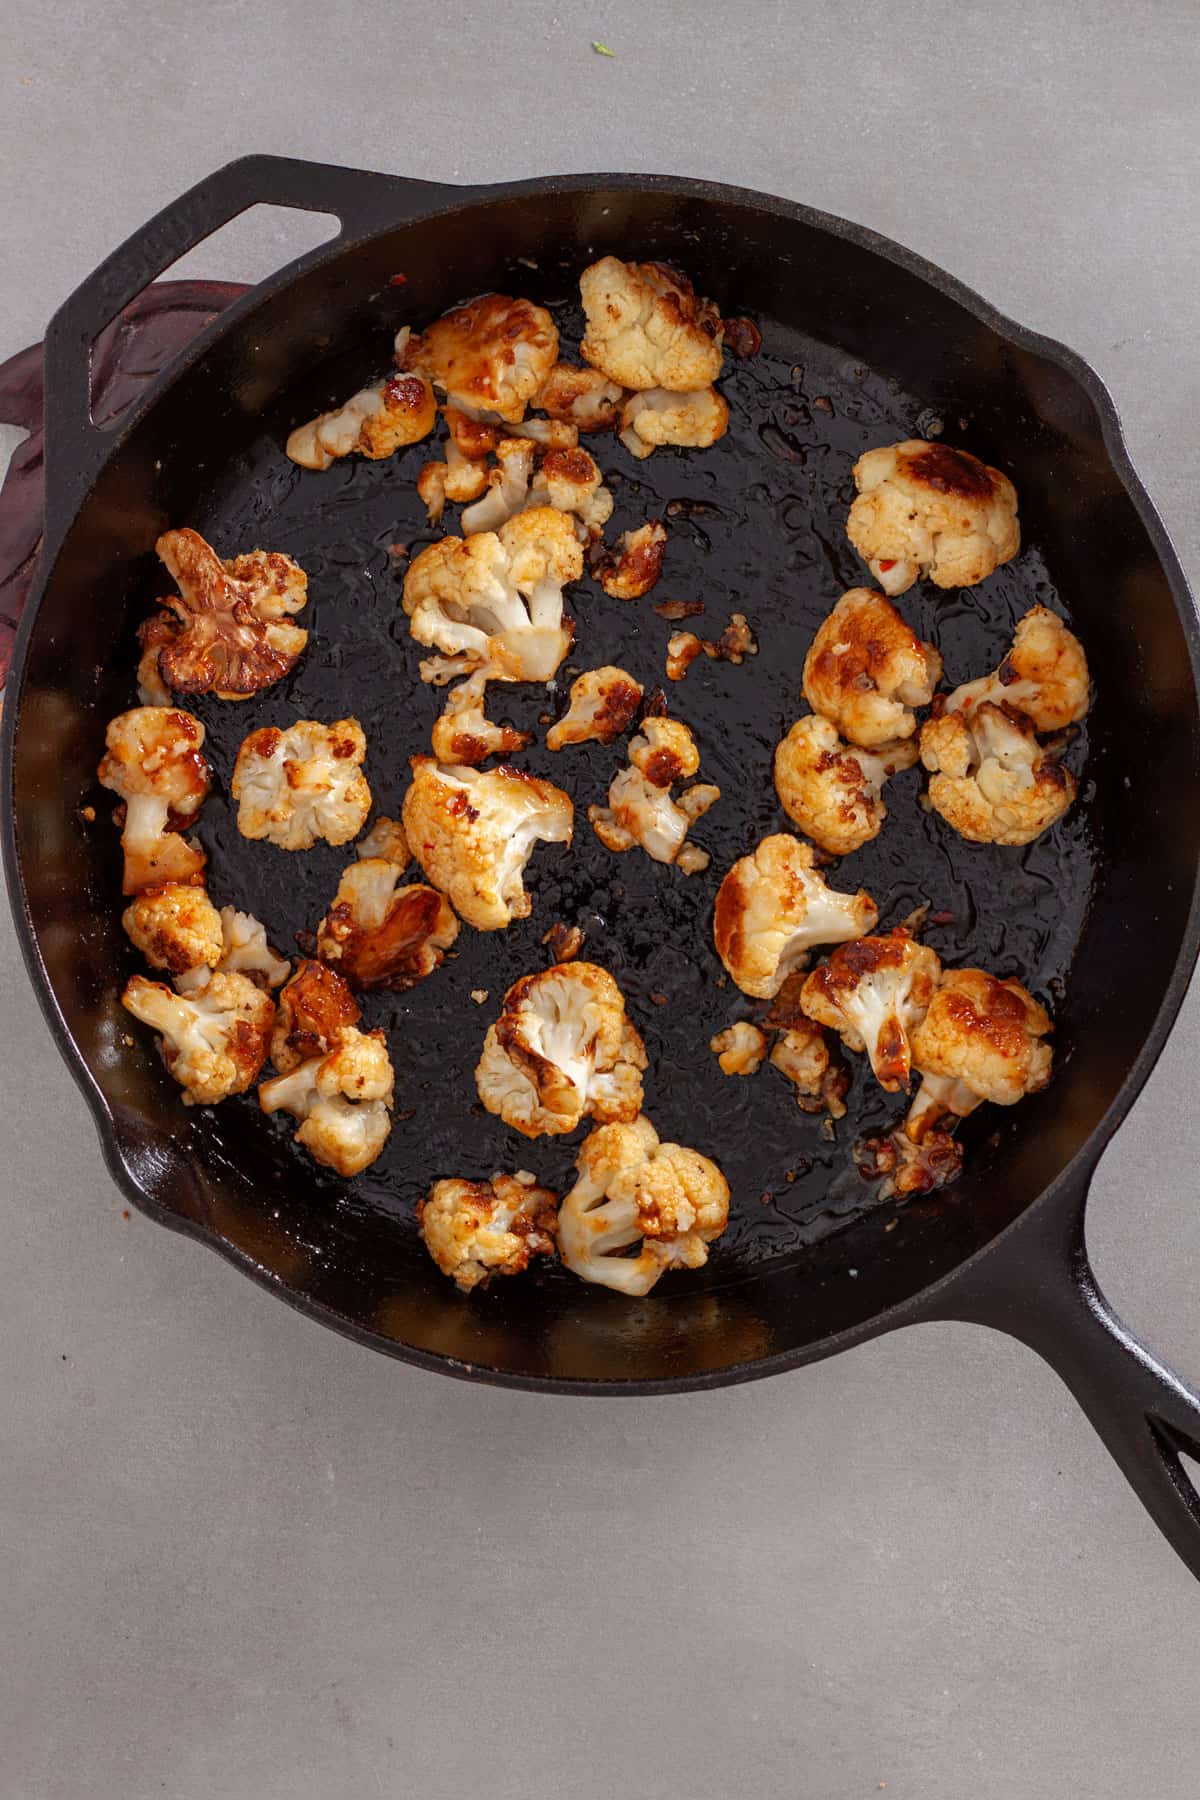 Seared cauliflower florets tossed with sweet chili sauce in a cast iron skillet.